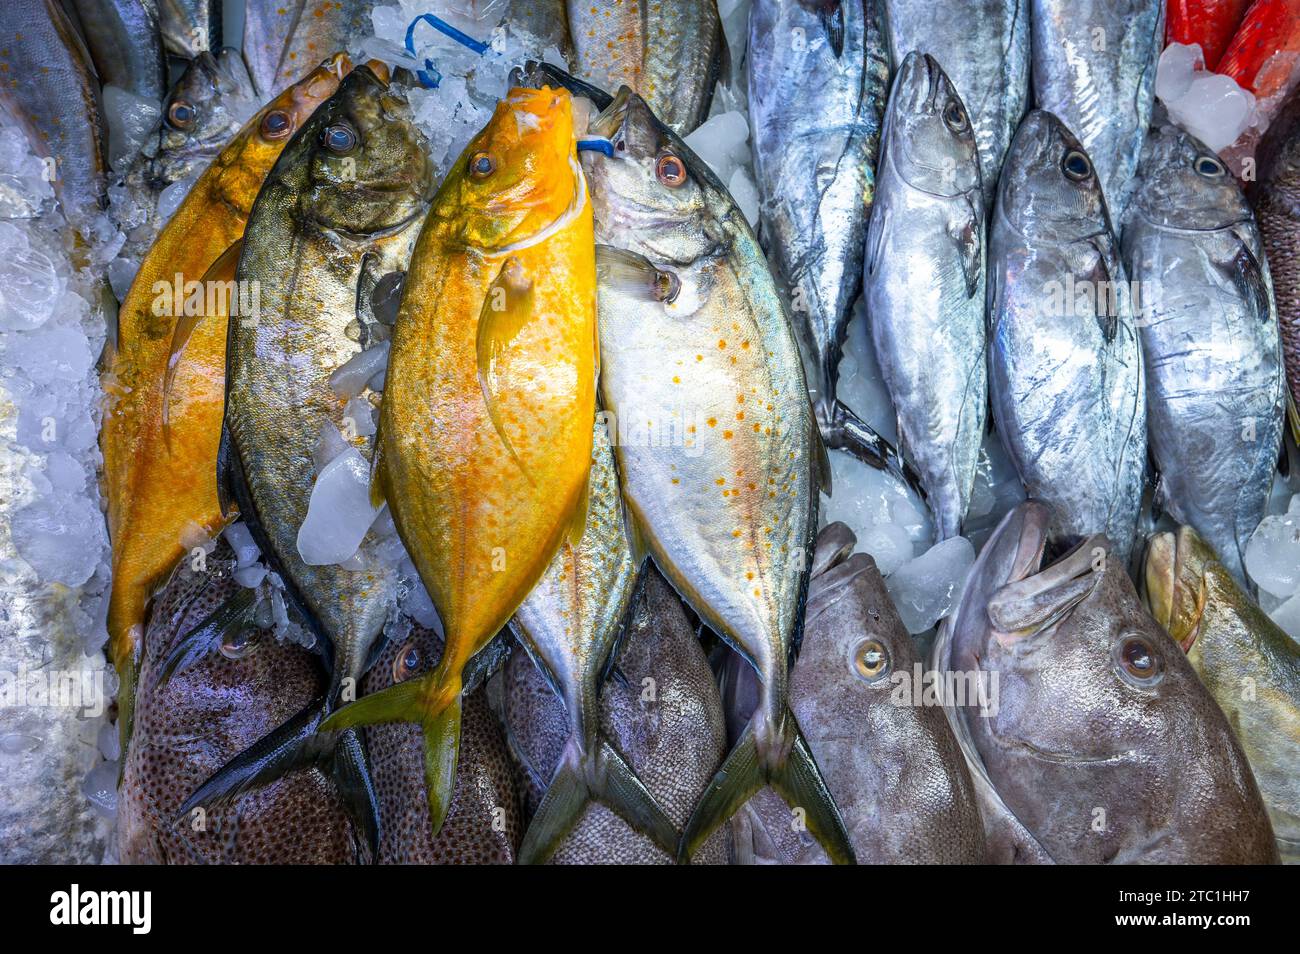 Colorful fish at a stand at a seafood market in Jeddah, Saudi Arabia. Stock Photo